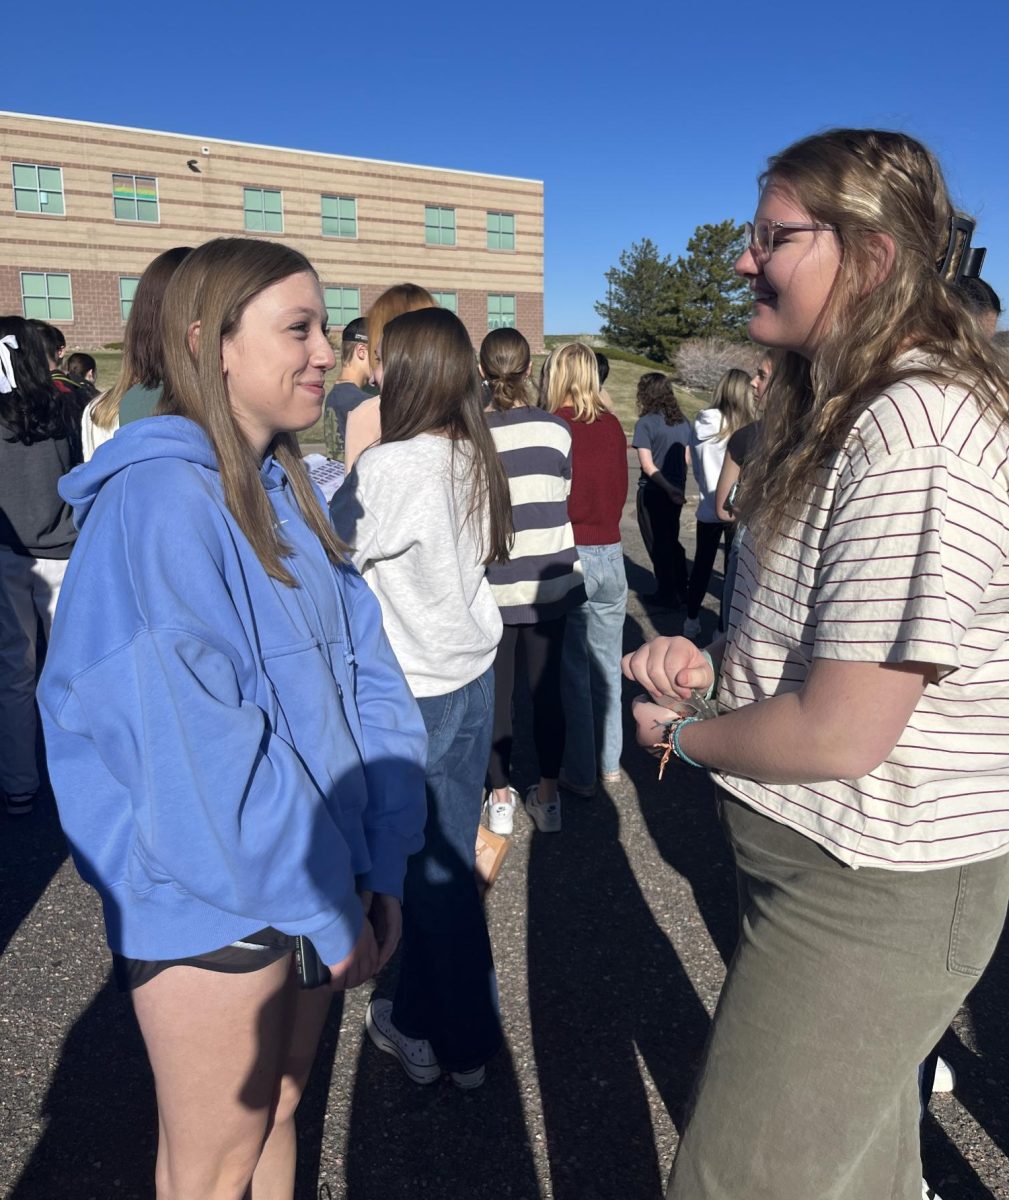 Caroline Watts ‘26 and Camille Olsen ‘26 stand outside after evacuating the building during an unplanned safety evacuation April 9. While in fifth period around 8:30 a.m., the fire alarm went off due to the steam from the kitchen dishwasher triggering the fire sensors. “It was actually a nice break from classes and we got to go outside,” Olsen said.